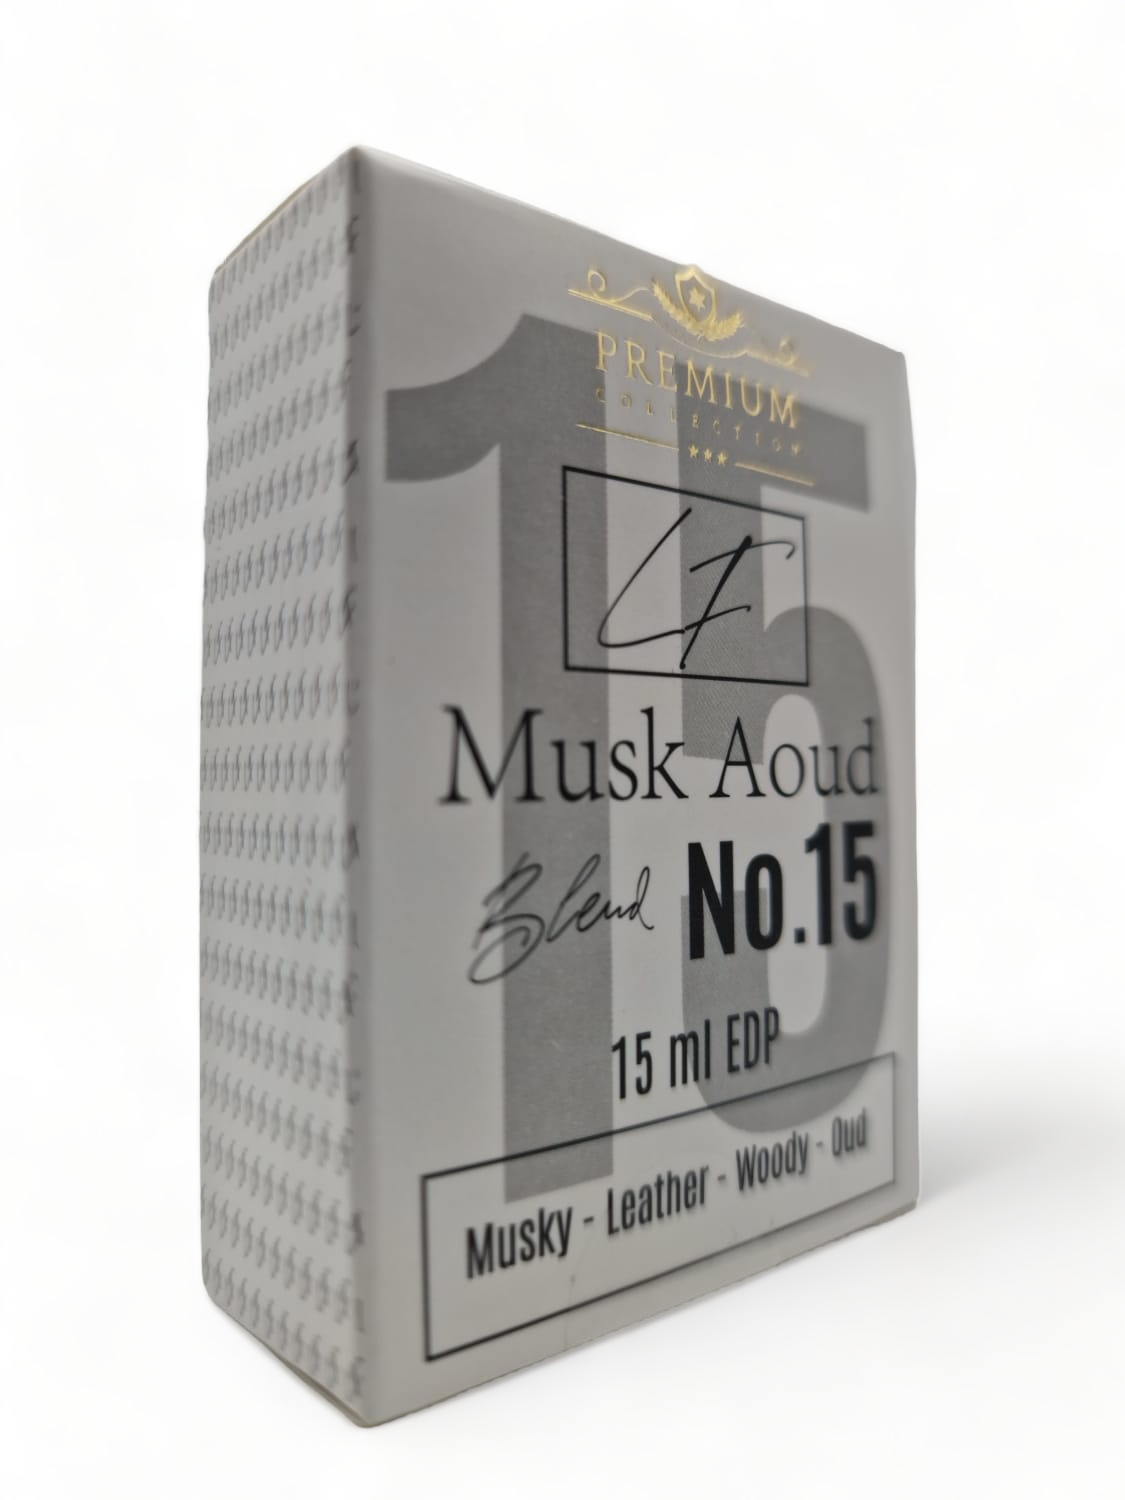 Blend No.15 Musk Aoud by Livfragrance® Signature Collection